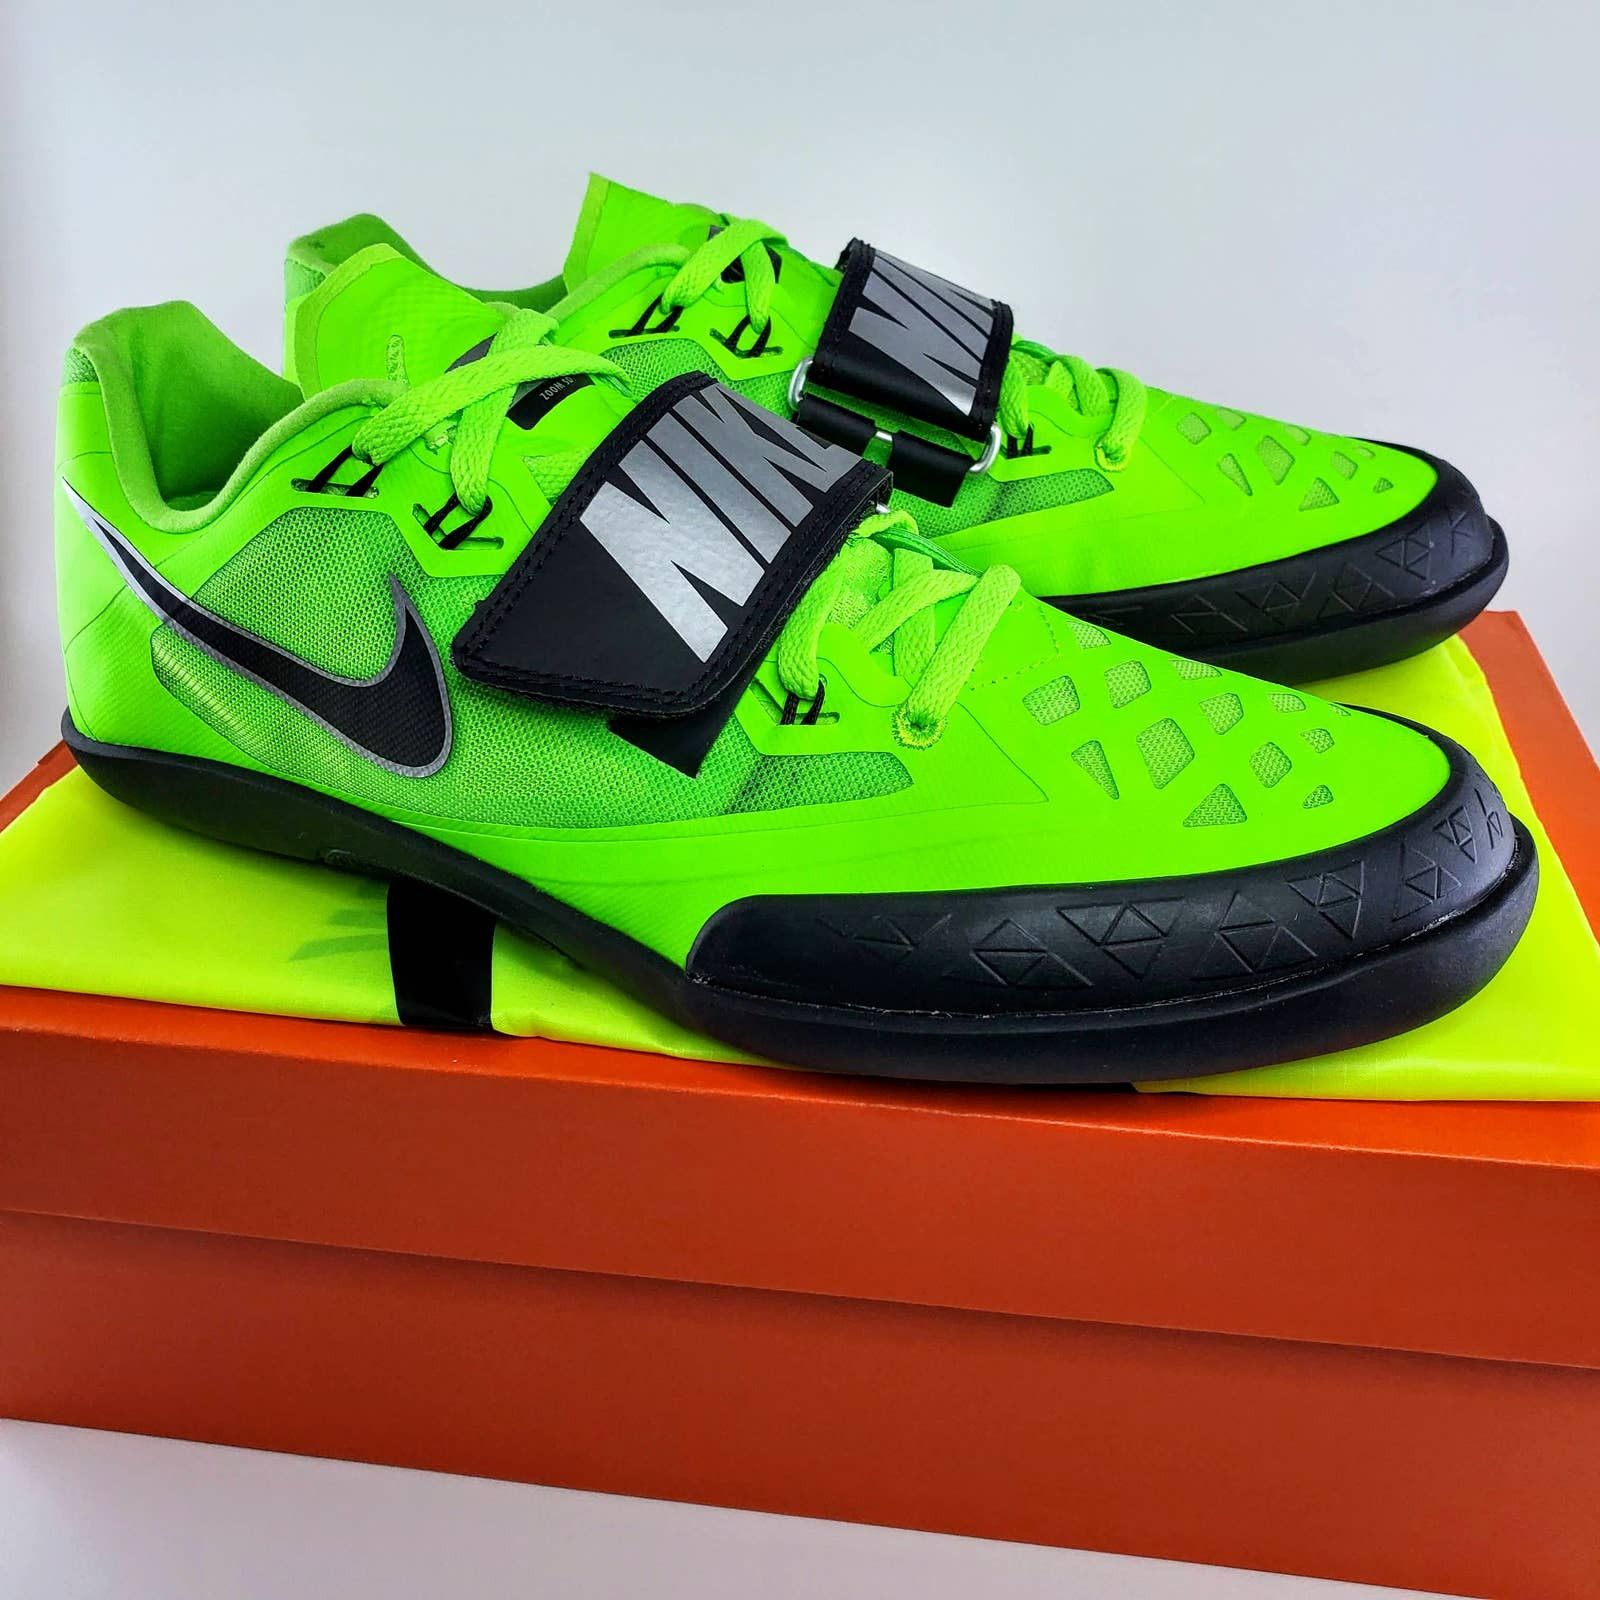 Nike NIKE Zoom Rival SD 4 Shoes Green Sizes 6.5, 7.5, 9.5, 12.5 Size US 9.5 / EU 42-43 - 2 Preview